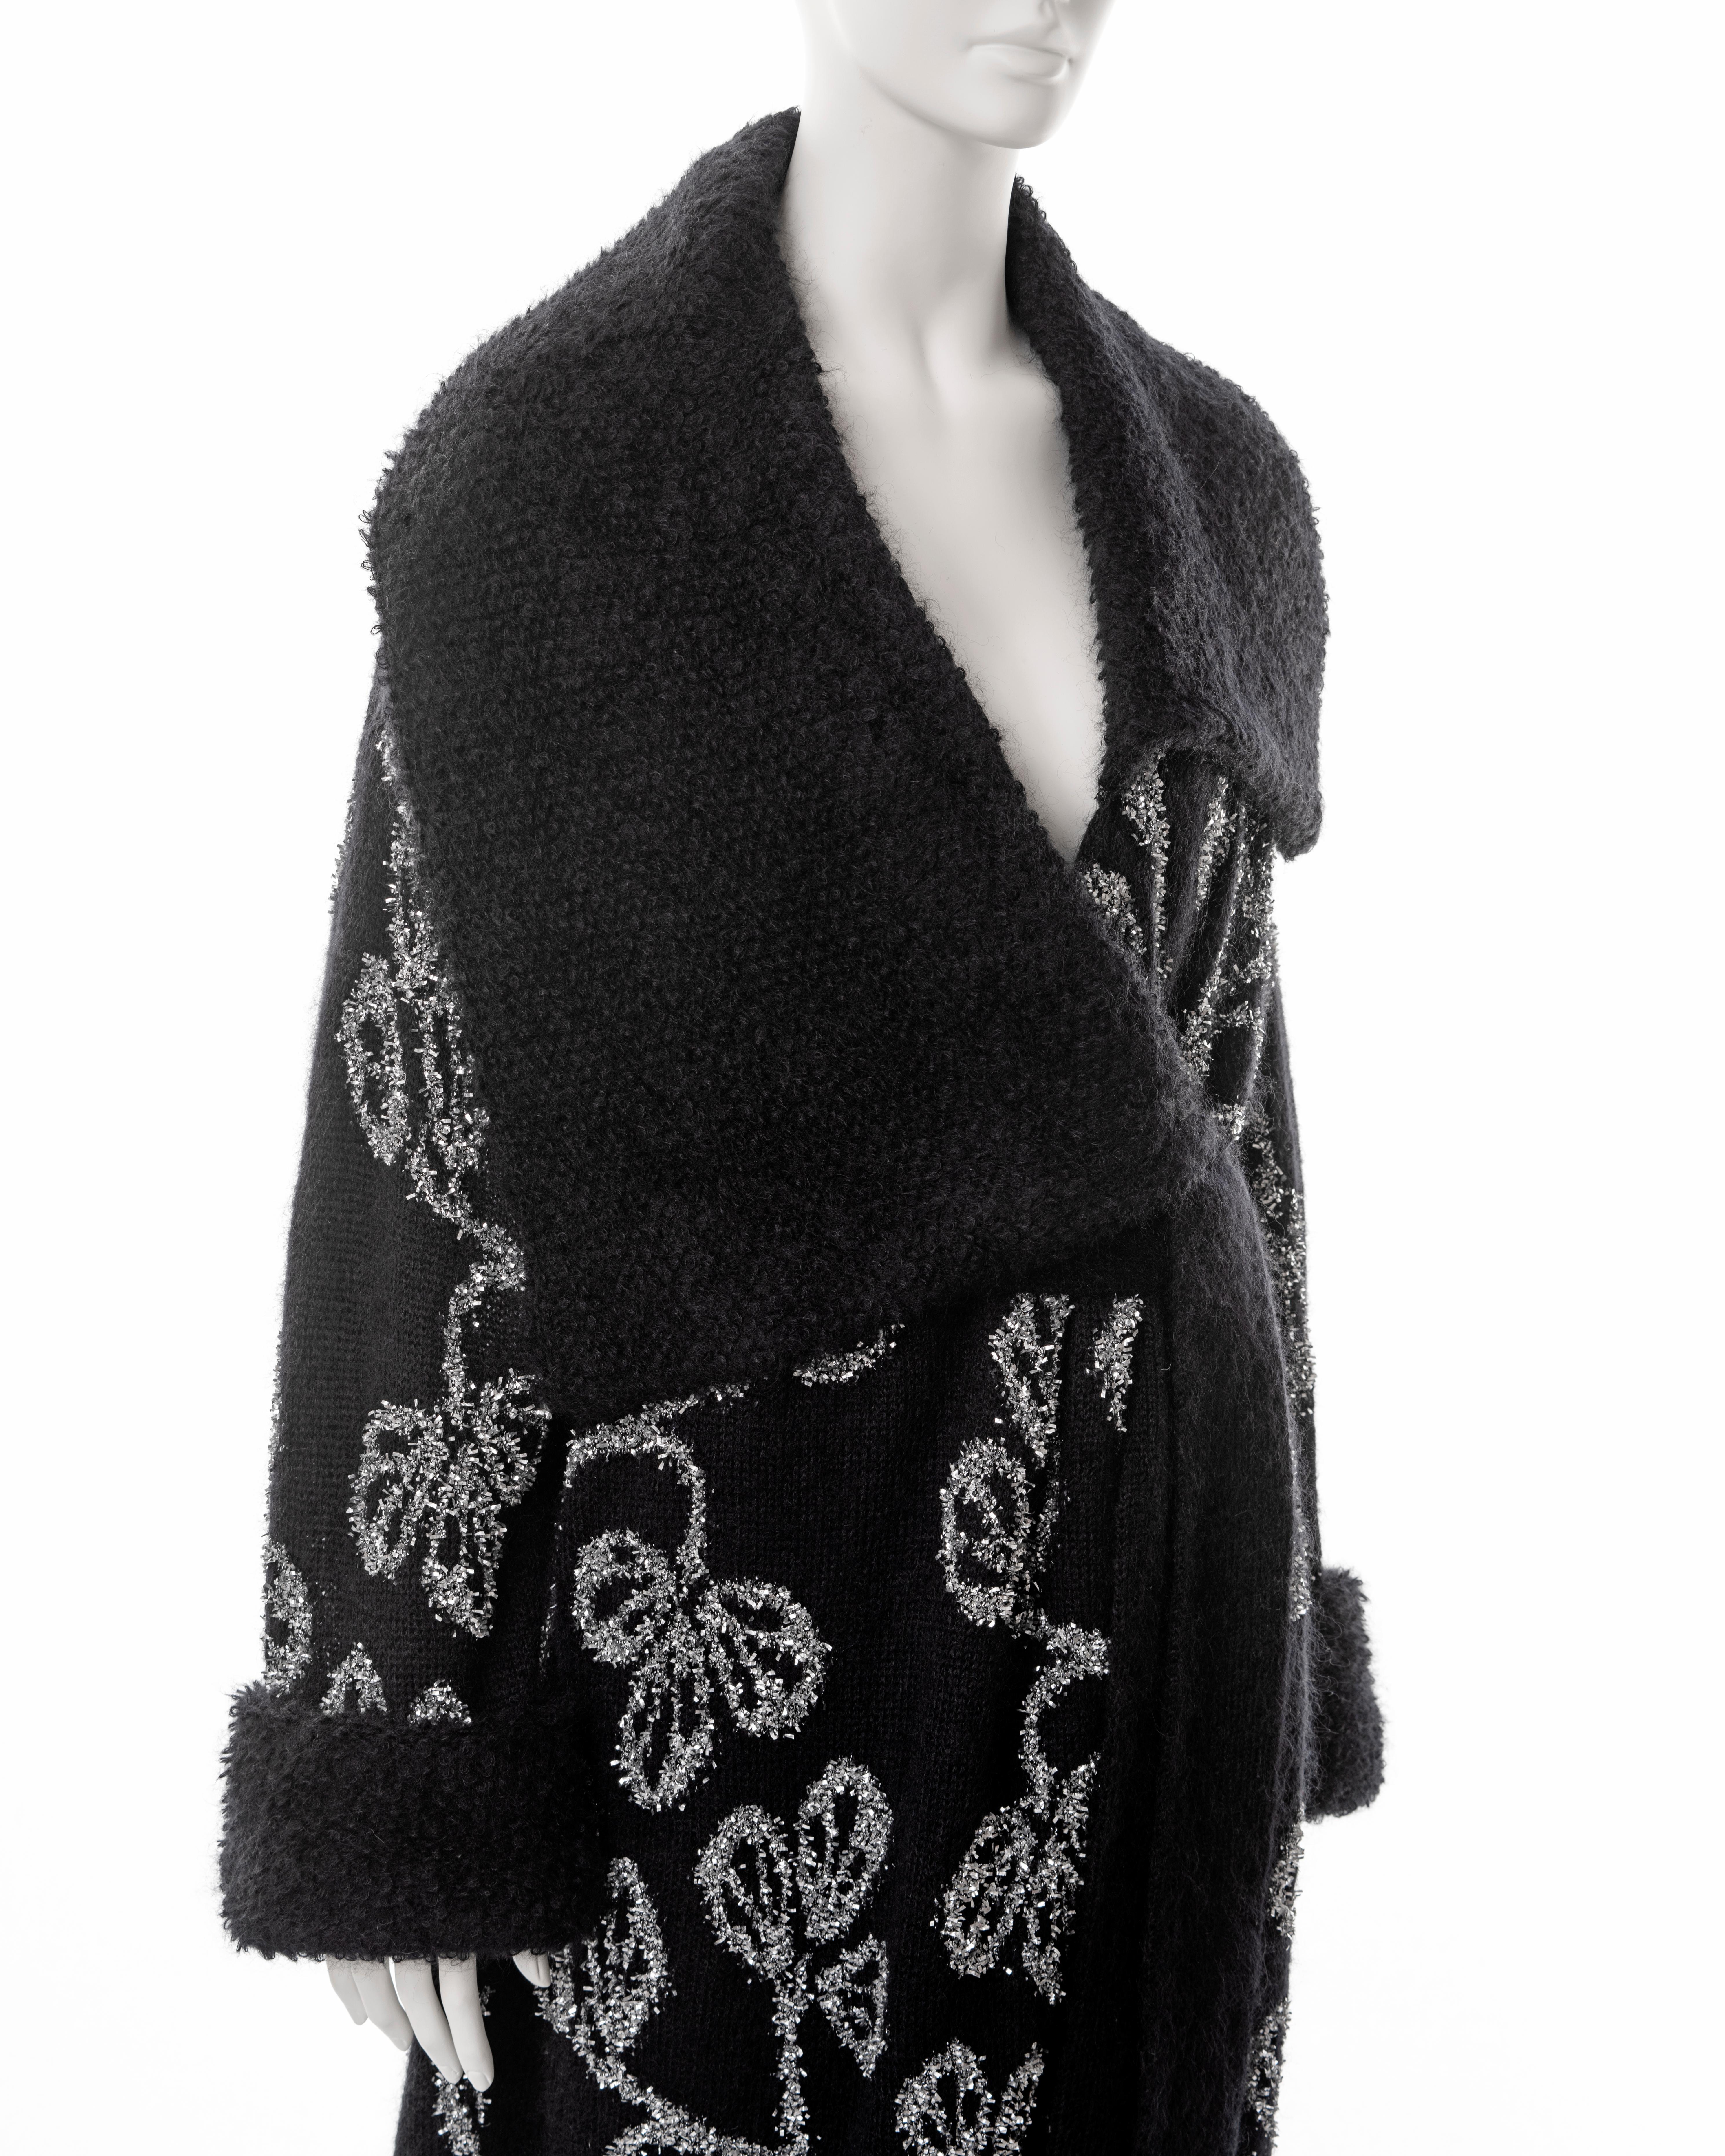 John Galliano black knitted wool cardigan with silver tinsel embroidery, ss 2003 1